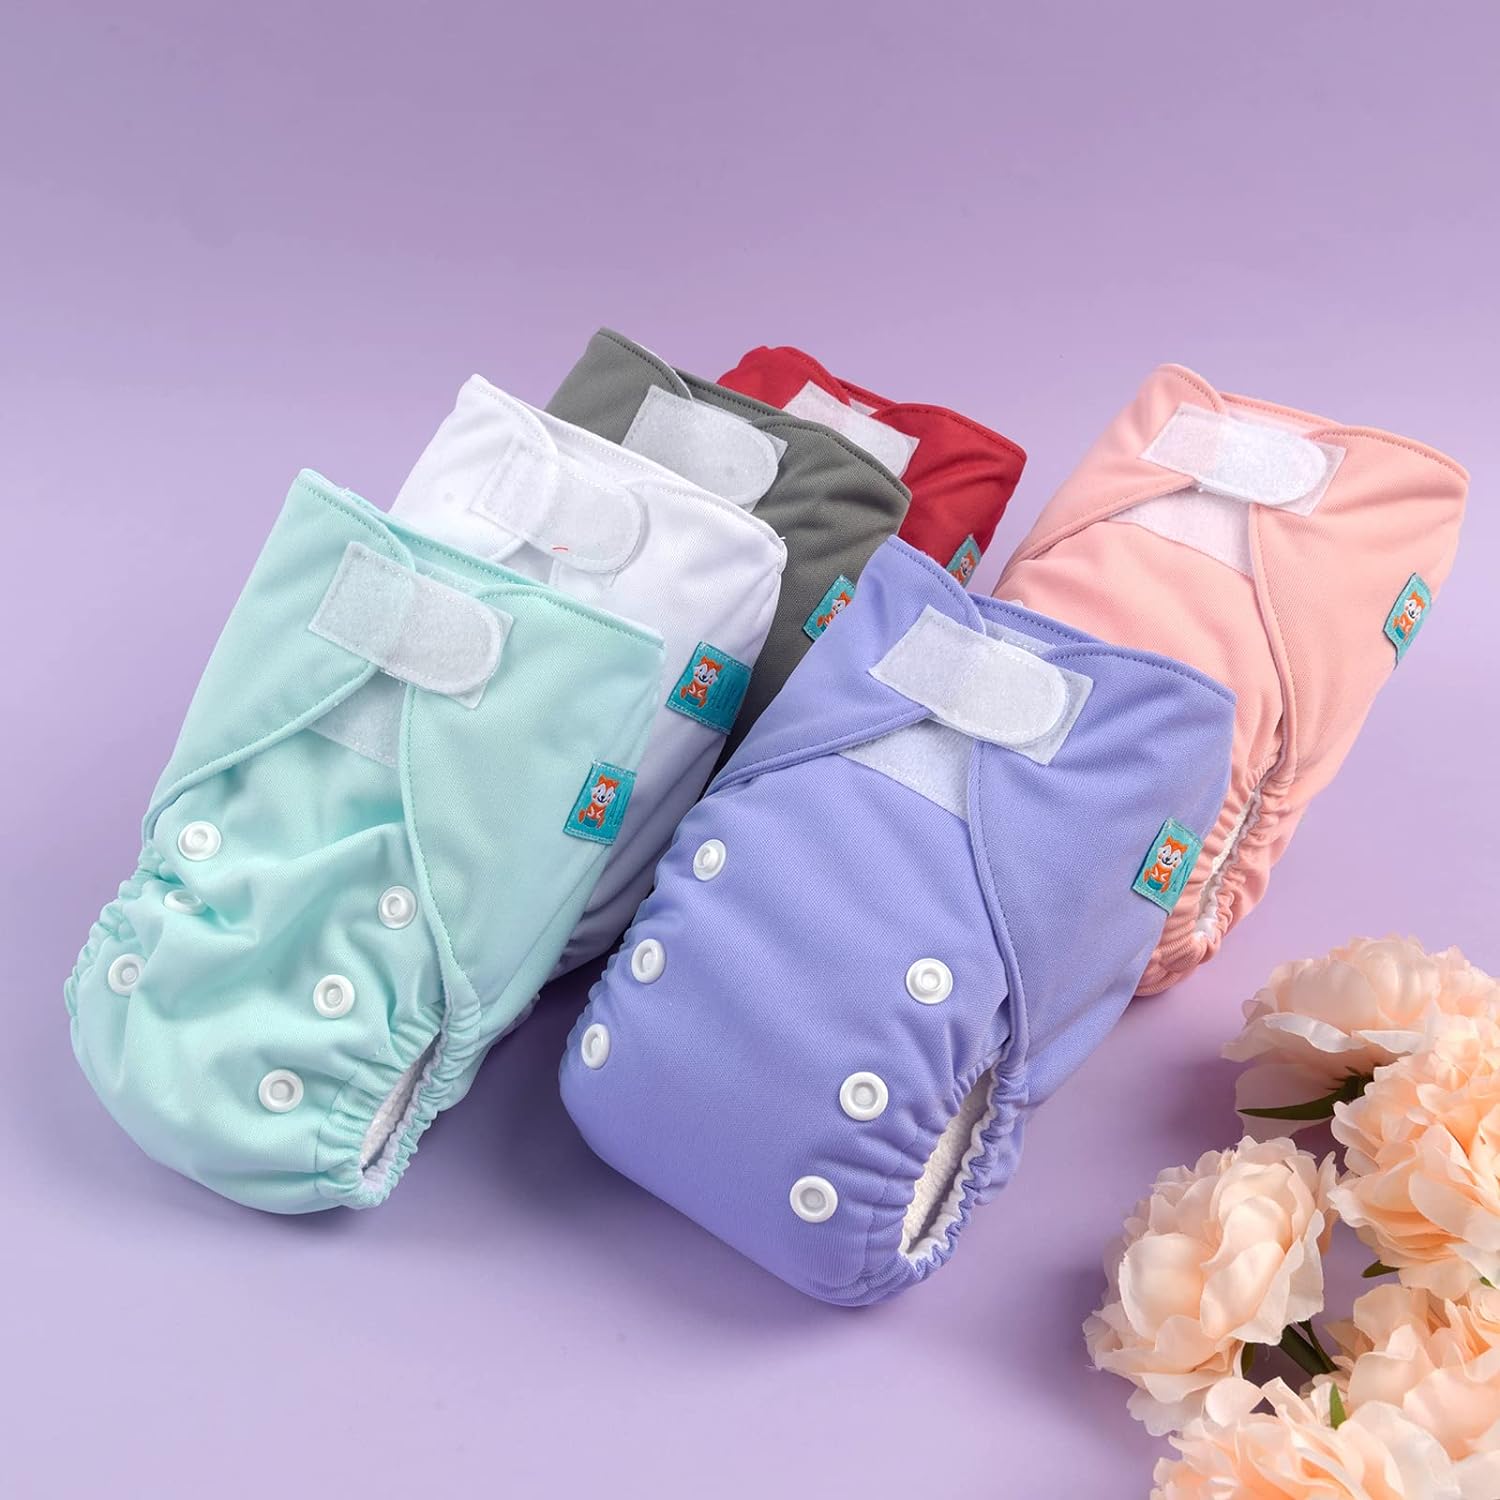 ALVABABY 6pcs with 12 Inserts Baby Cloth Diapers Pocket Newborn Diaper for Less Than 12pounds Baby Snaps Cloth Diapers Nappy